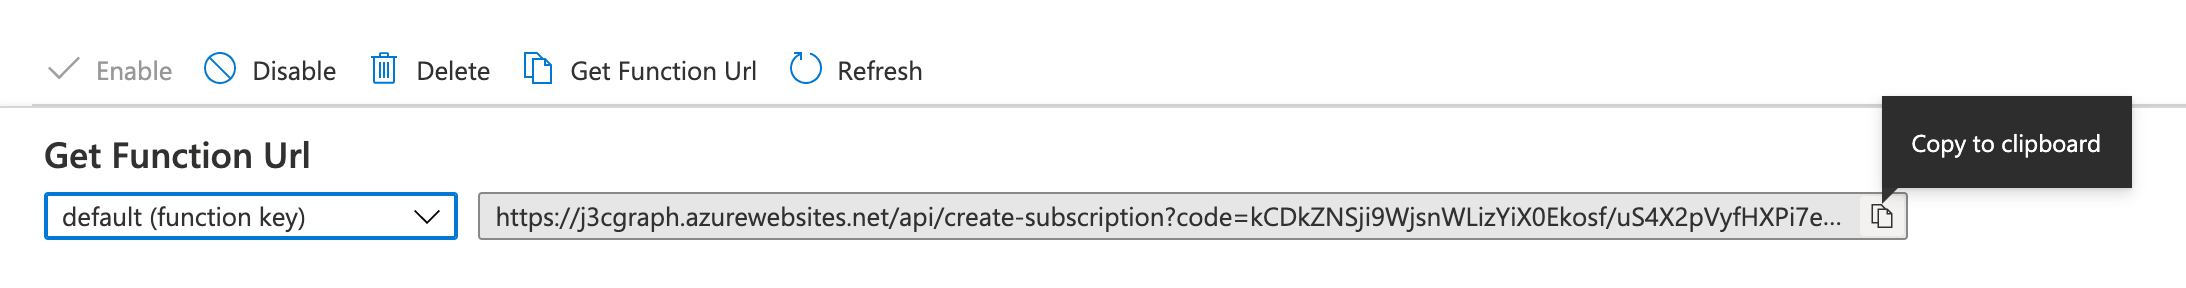 Execute create-subscription function